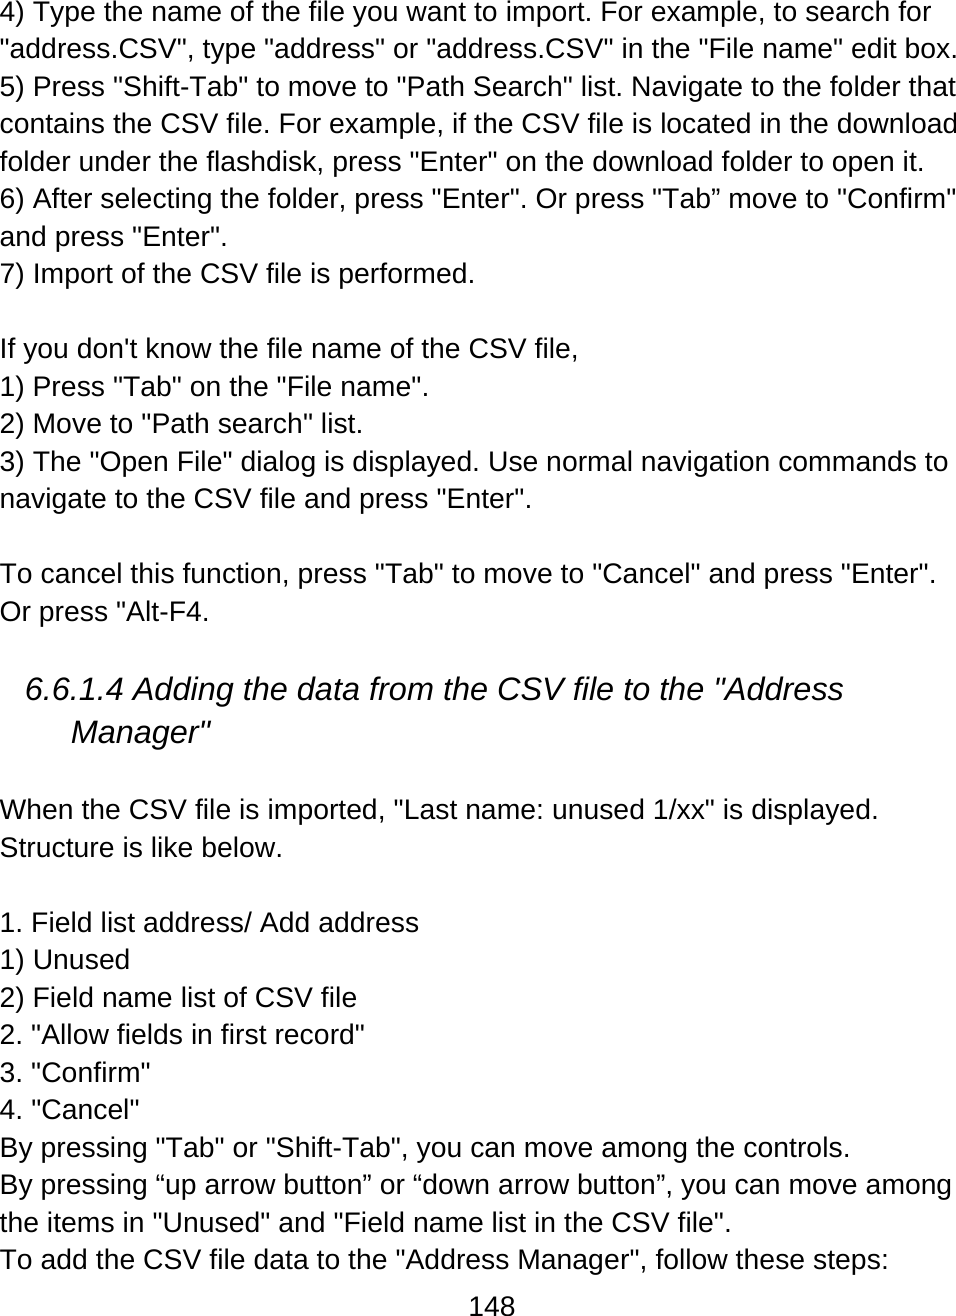 148  4) Type the name of the file you want to import. For example, to search for &quot;address.CSV&quot;, type &quot;address&quot; or &quot;address.CSV&quot; in the &quot;File name&quot; edit box. 5) Press &quot;Shift-Tab&quot; to move to &quot;Path Search&quot; list. Navigate to the folder that contains the CSV file. For example, if the CSV file is located in the download folder under the flashdisk, press &quot;Enter&quot; on the download folder to open it. 6) After selecting the folder, press &quot;Enter&quot;. Or press &quot;Tab” move to &quot;Confirm&quot; and press &quot;Enter&quot;. 7) Import of the CSV file is performed.  If you don&apos;t know the file name of the CSV file,  1) Press &quot;Tab&quot; on the &quot;File name&quot;. 2) Move to &quot;Path search&quot; list. 3) The &quot;Open File&quot; dialog is displayed. Use normal navigation commands to navigate to the CSV file and press &quot;Enter&quot;.   To cancel this function, press &quot;Tab&quot; to move to &quot;Cancel&quot; and press &quot;Enter&quot;. Or press &quot;Alt-F4.  6.6.1.4 Adding the data from the CSV file to the &quot;Address Manager&quot;  When the CSV file is imported, &quot;Last name: unused 1/xx&quot; is displayed.  Structure is like below.  1. Field list address/ Add address 1) Unused 2) Field name list of CSV file 2. &quot;Allow fields in first record&quot; 3. &quot;Confirm&quot; 4. &quot;Cancel&quot; By pressing &quot;Tab&quot; or &quot;Shift-Tab&quot;, you can move among the controls. By pressing “up arrow button” or “down arrow button”, you can move among the items in &quot;Unused&quot; and &quot;Field name list in the CSV file&quot;. To add the CSV file data to the &quot;Address Manager&quot;, follow these steps: 